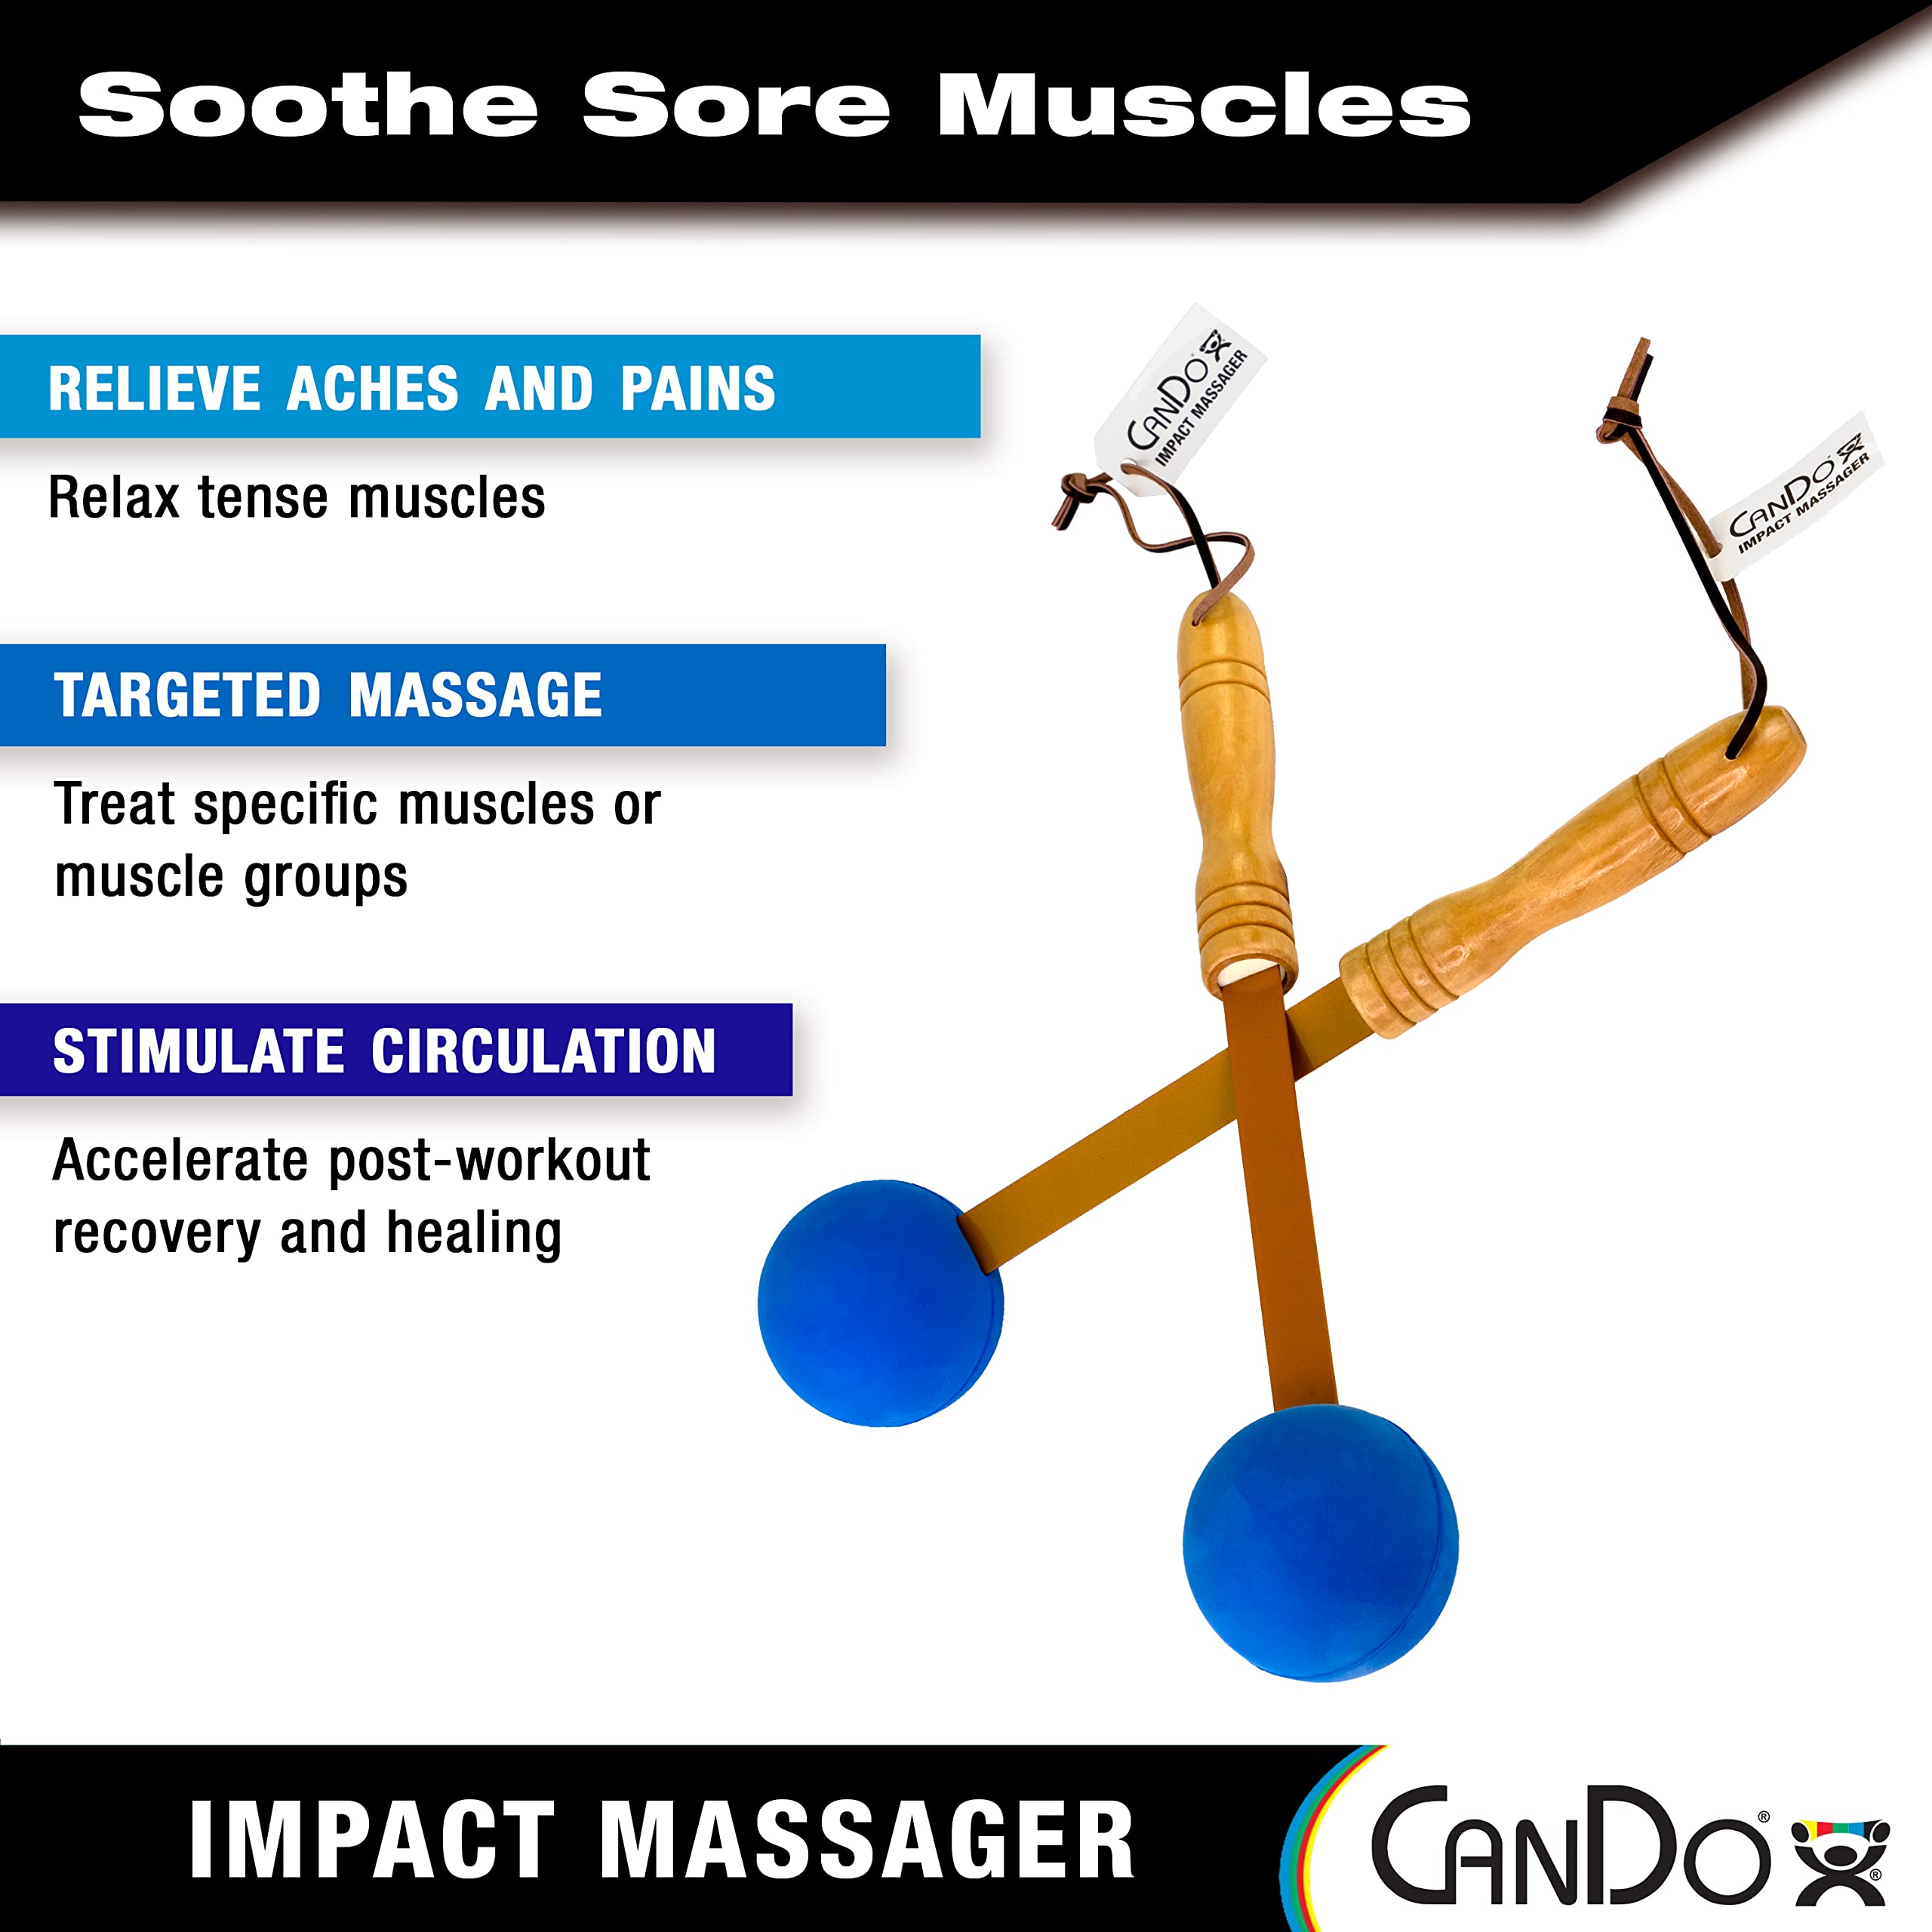 CanDo Percussion Massagers 2 Pack Manual Ball Massage, Flexible Stick Massage Tools for Sore Muscles, Back, Shoulders, Neck, Legs, and Total Body with Comfort Grip Wood Handles, Blue